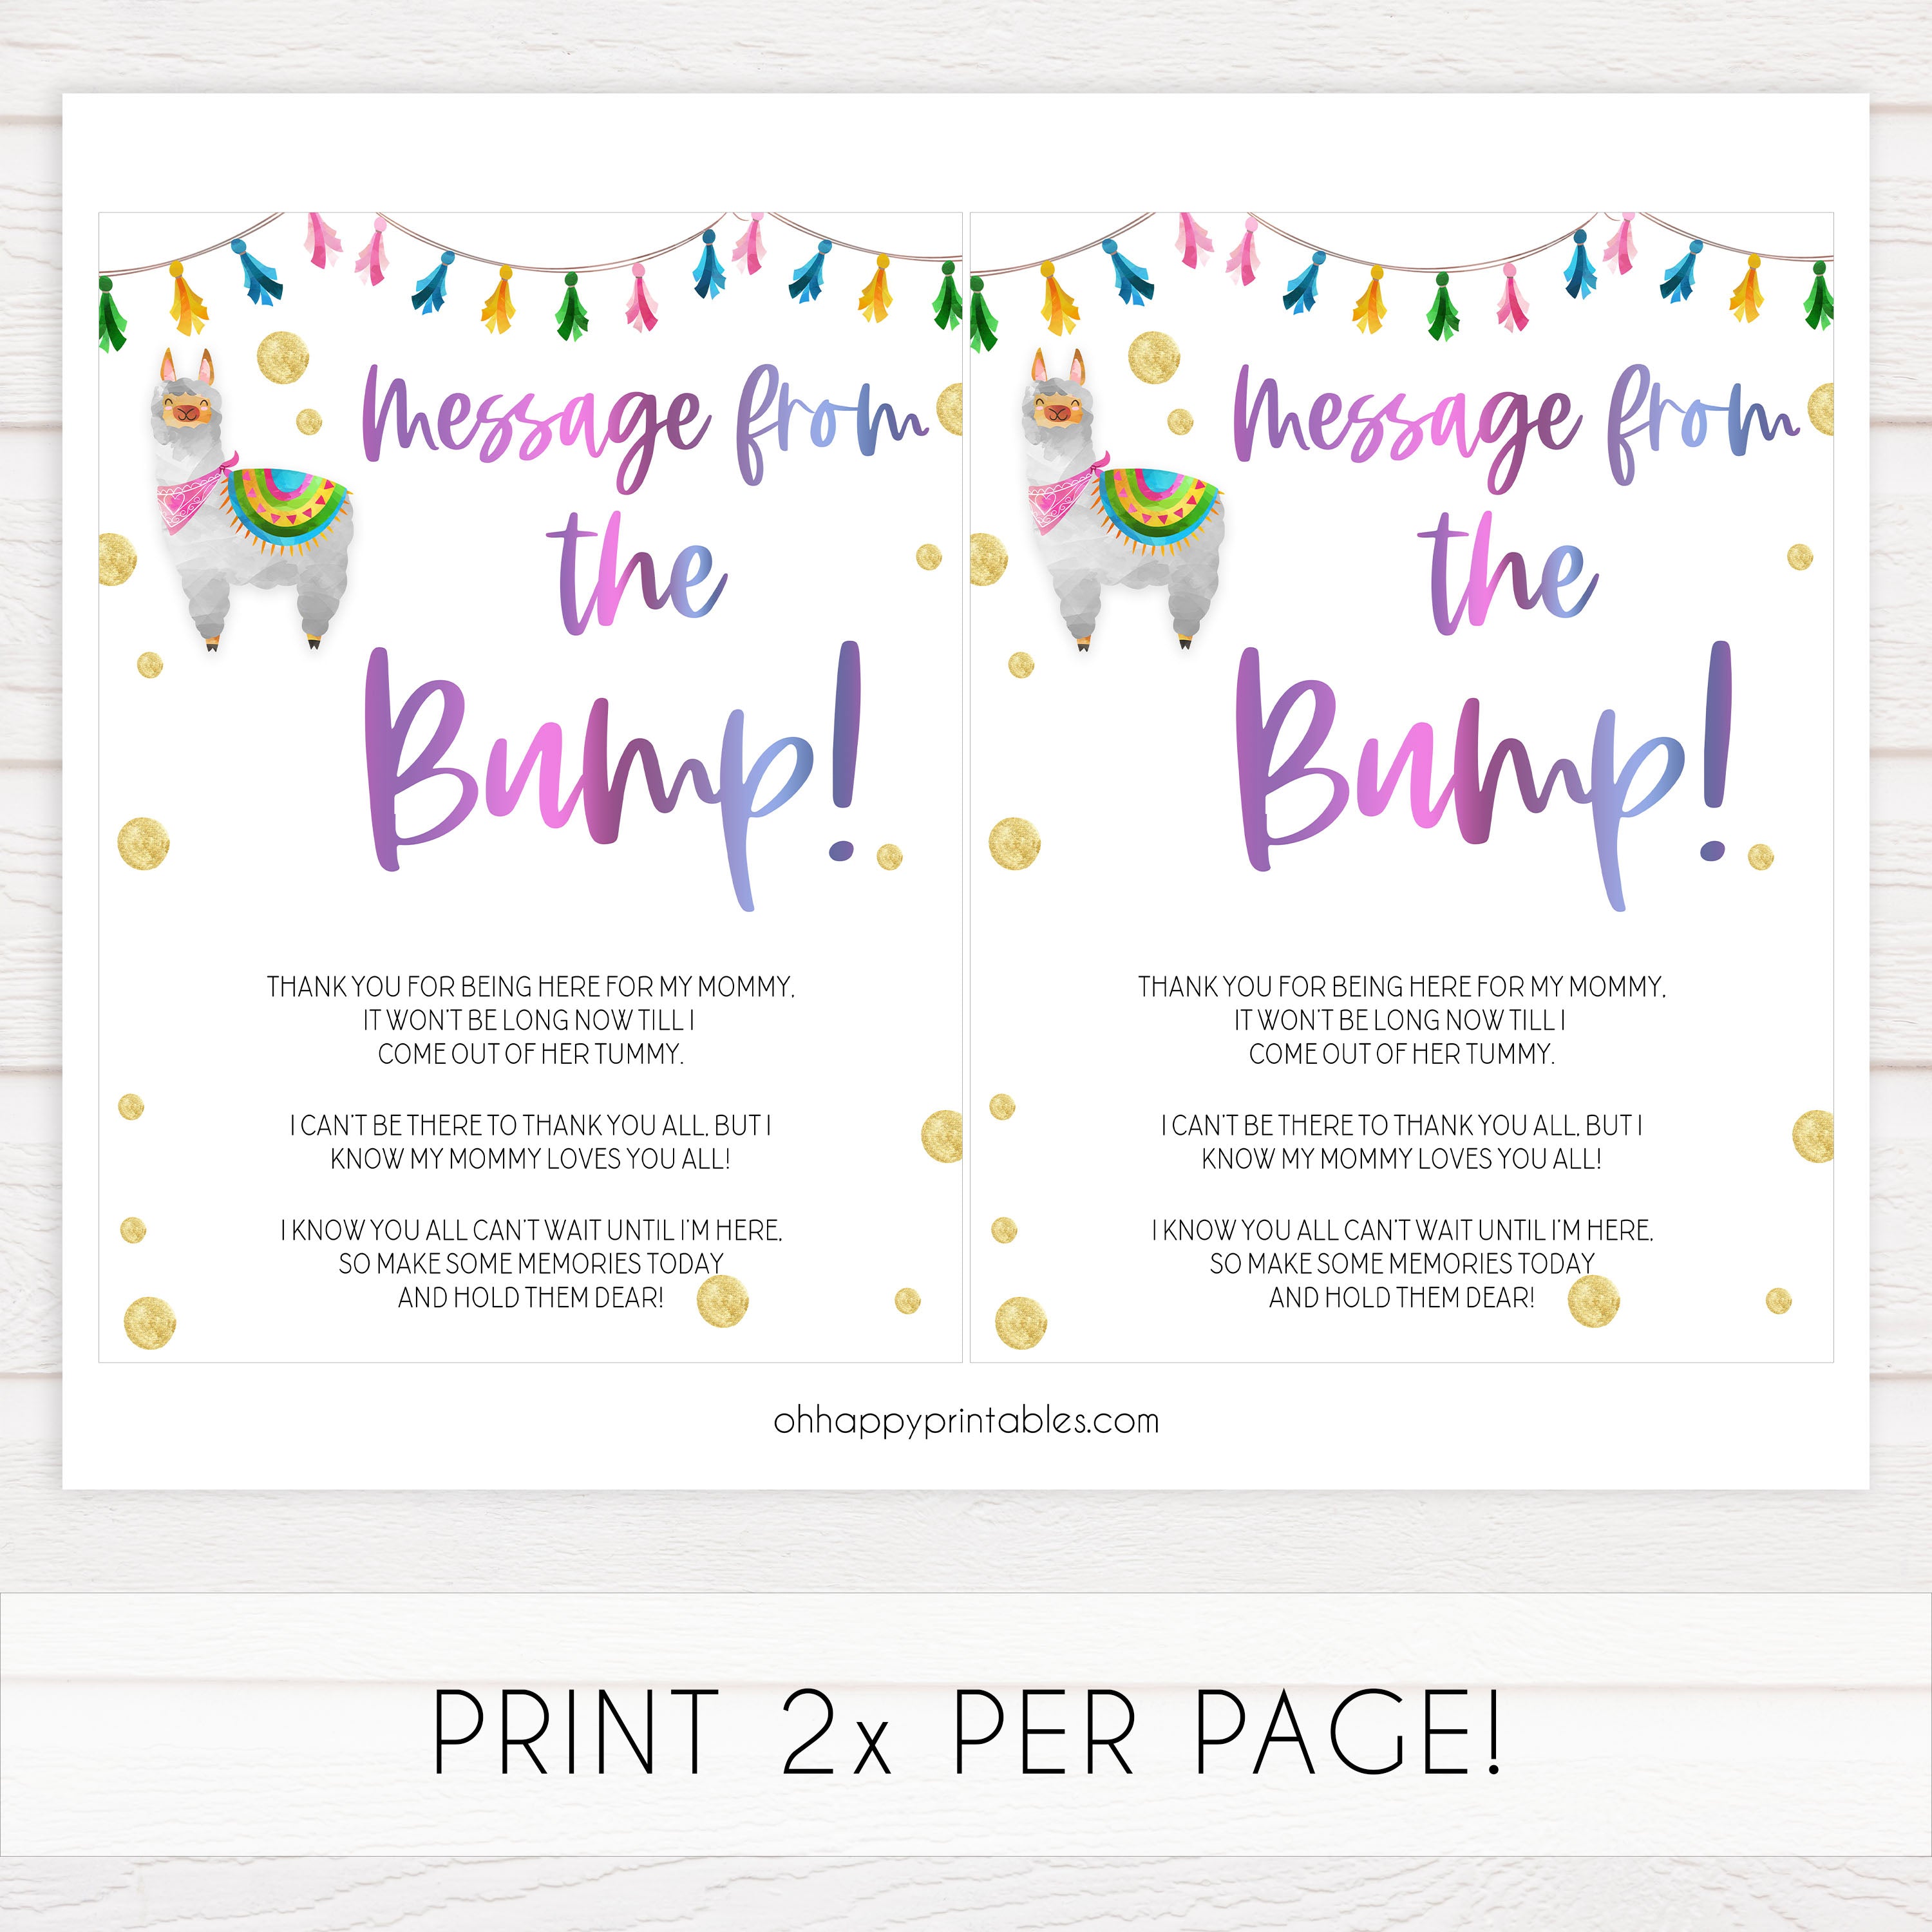 message from the bump game, Printable baby shower games, llama fiesta fun baby games, baby shower games, fun baby shower ideas, top baby shower ideas, Llama fiesta shower baby shower, fiesta baby shower ideas